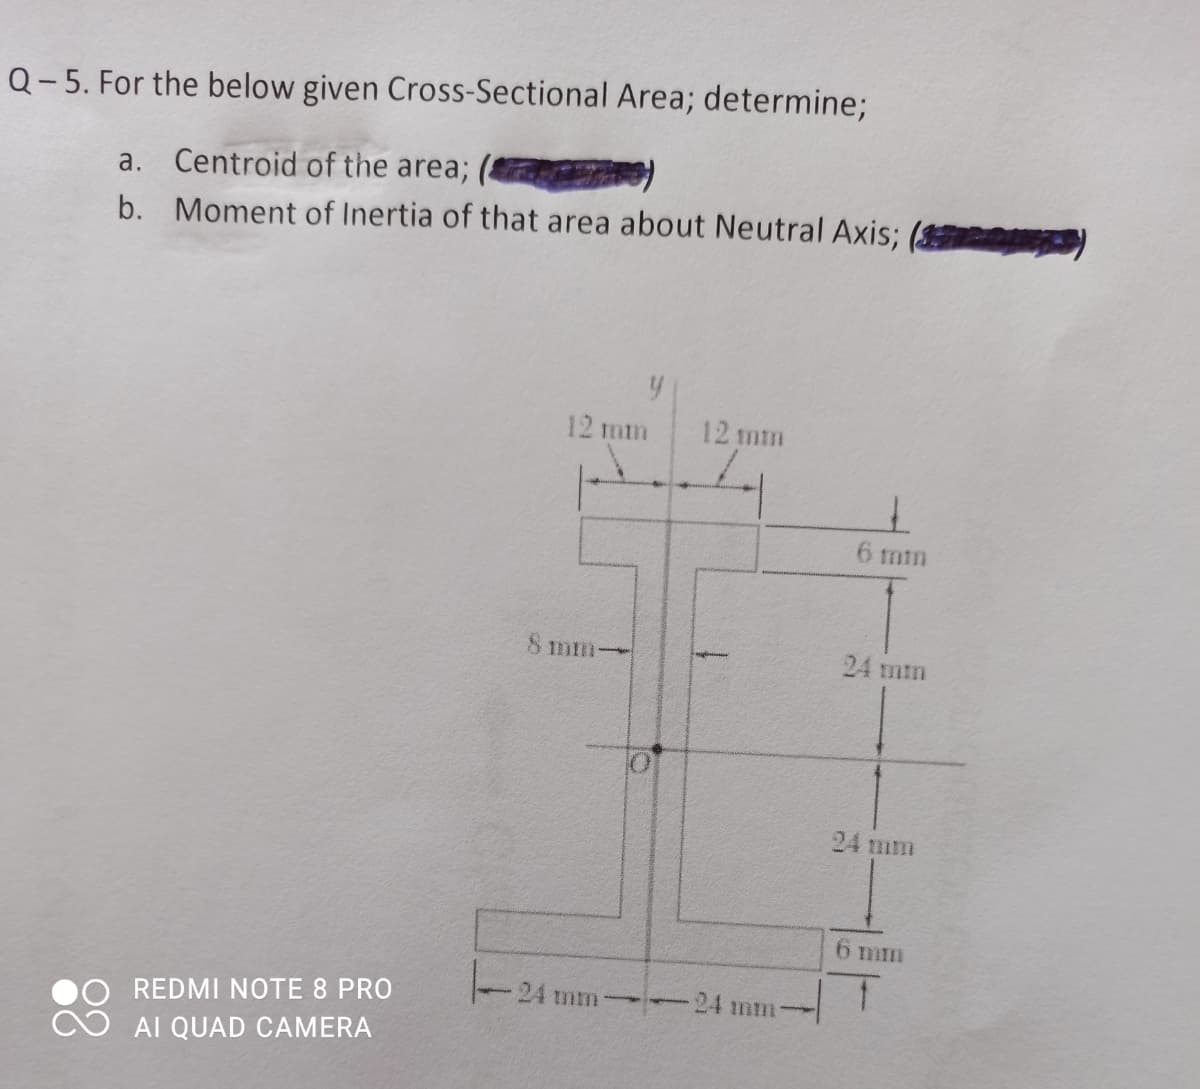 Q-5. For the below given Cross-Sectional Area; determine;
a. Centroid of the area;
b. Moment of Inertia of that area about Neutral Axis;
12 mm
12 mm
6 mm
8 mm-
24 mm
24 mm
6 mm
24 mm
24 mm
REDMI NOTE 8 PRO
AI QUAD CAMERA
